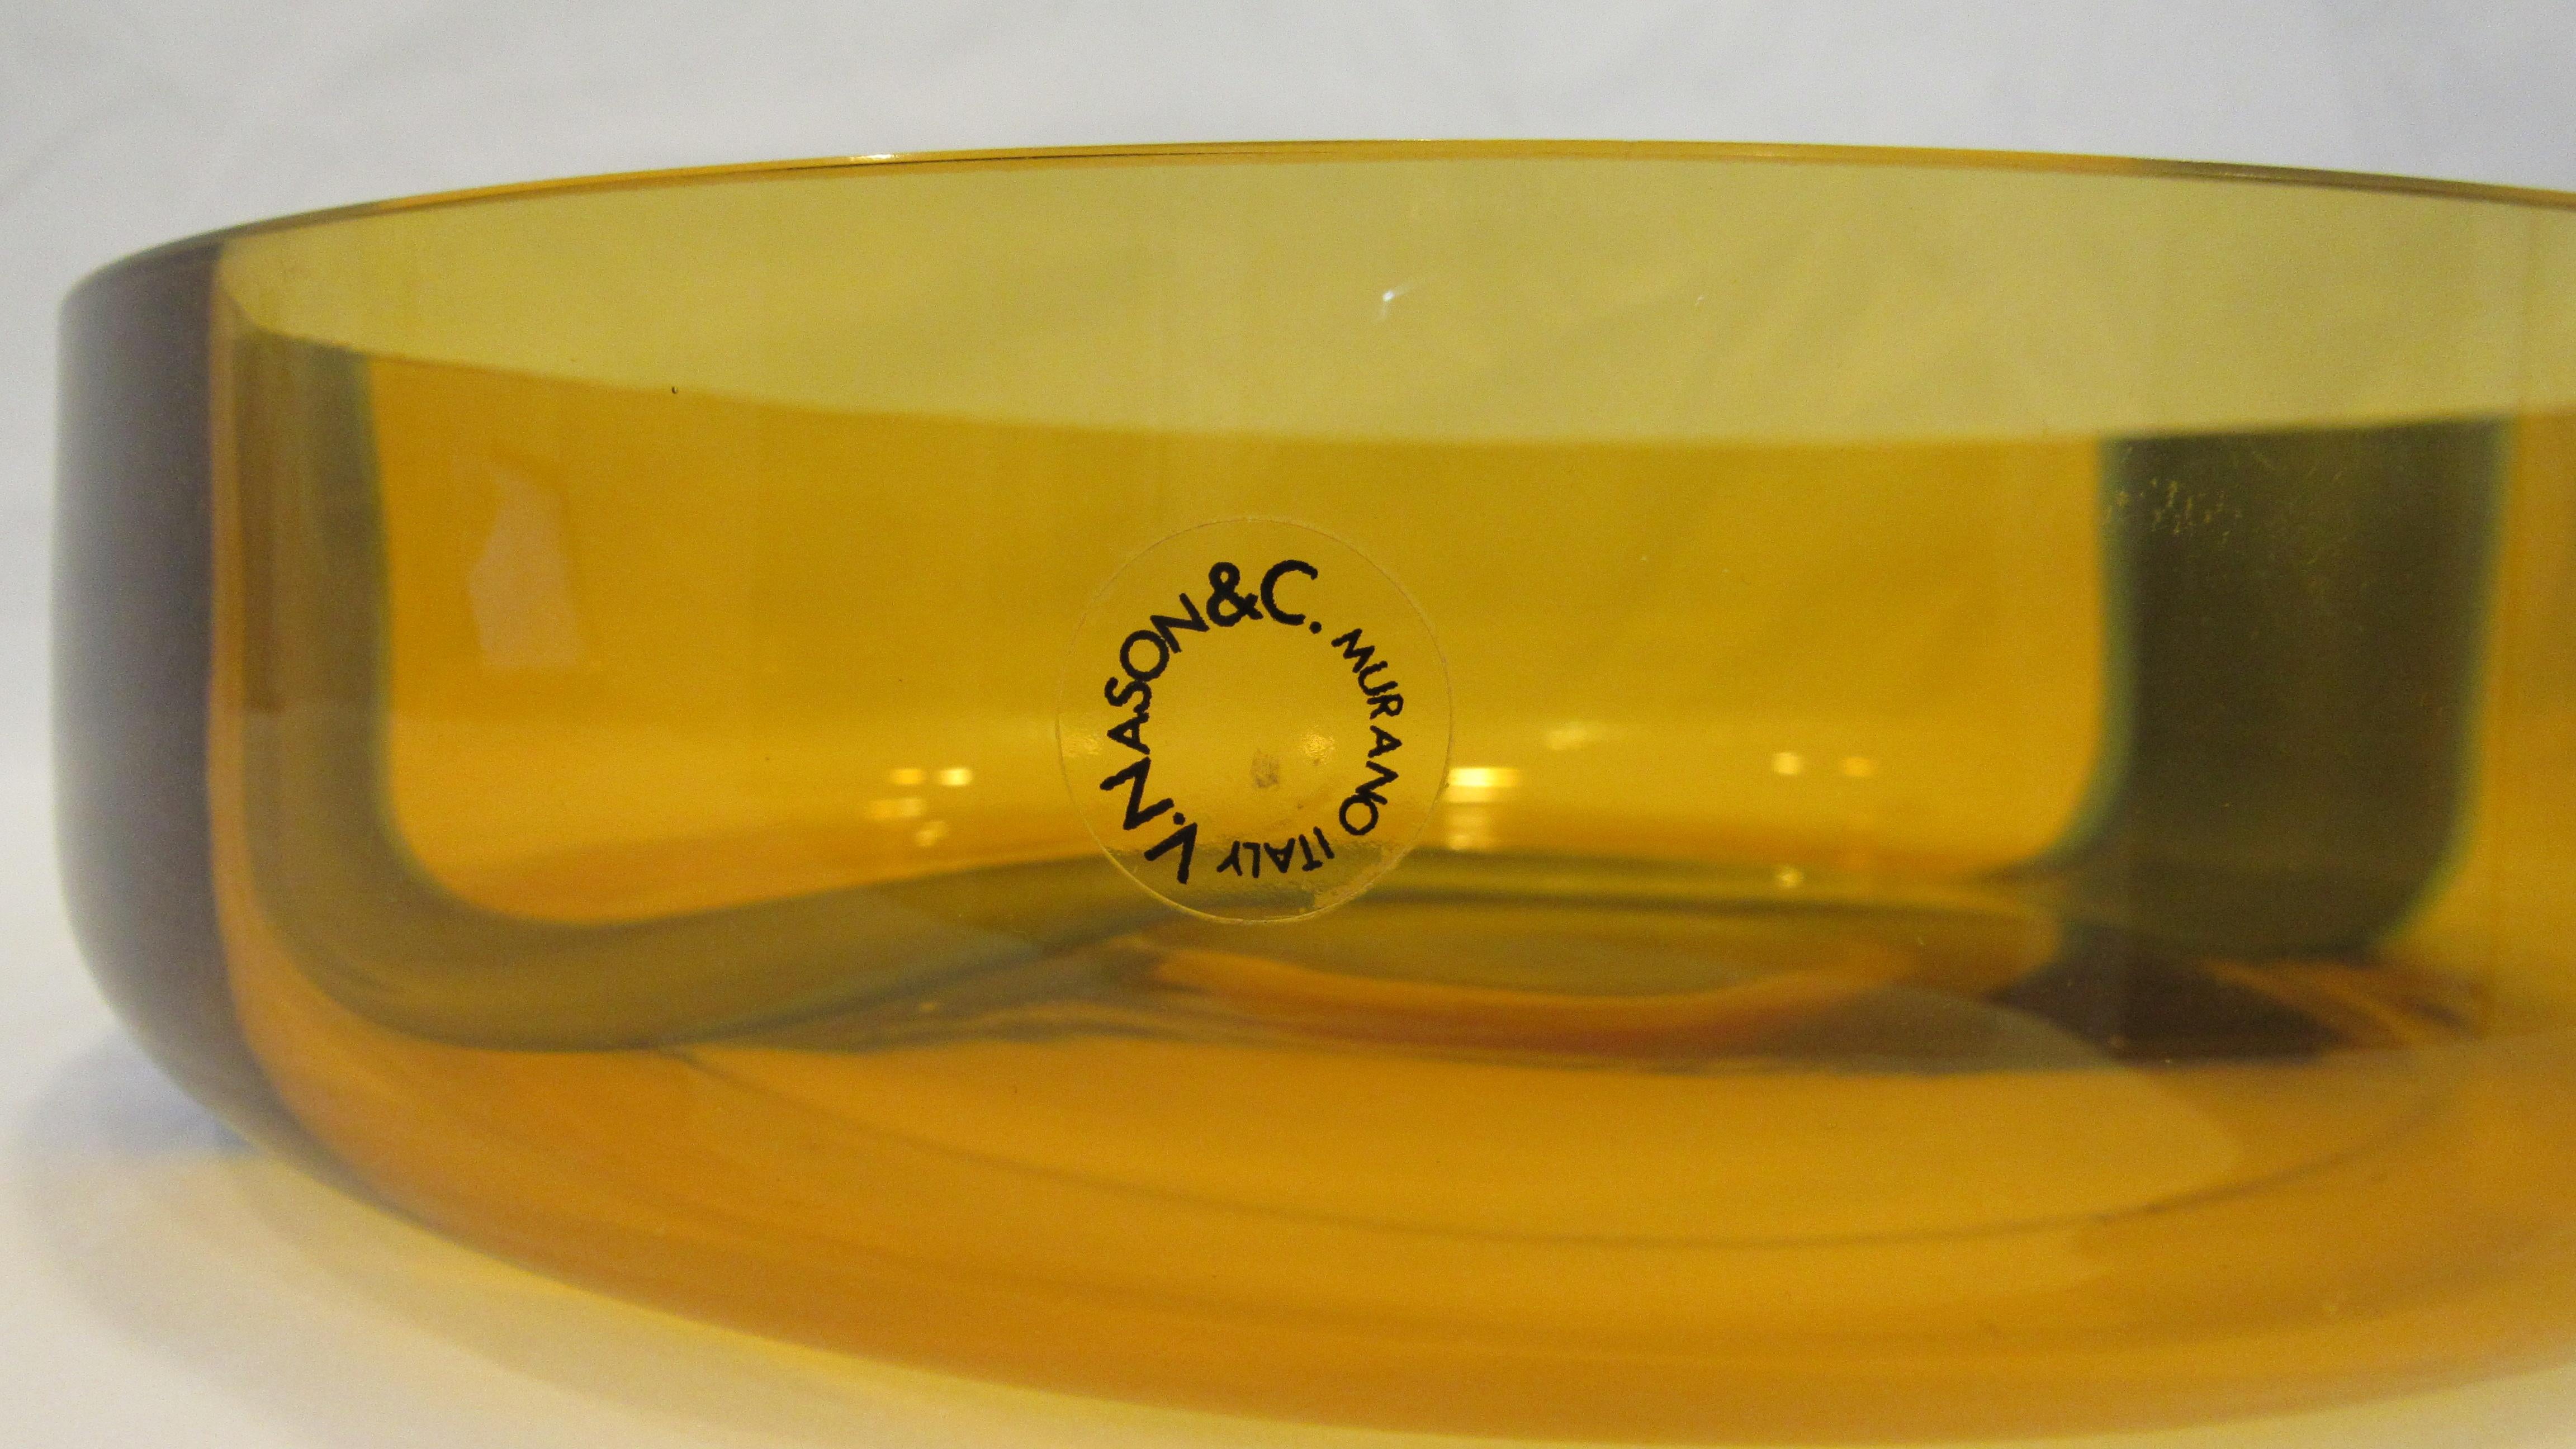 V. Nasson & co. Vintage hand blown Murano glass bowl offered for sale is a new unused amber and blue Murano glass bowl by v. Nasson & co. Vincenzo Nason established his glassworks, Vincenzo Nason & Cie (VNC) on the island of Murano, Venice, Italy in